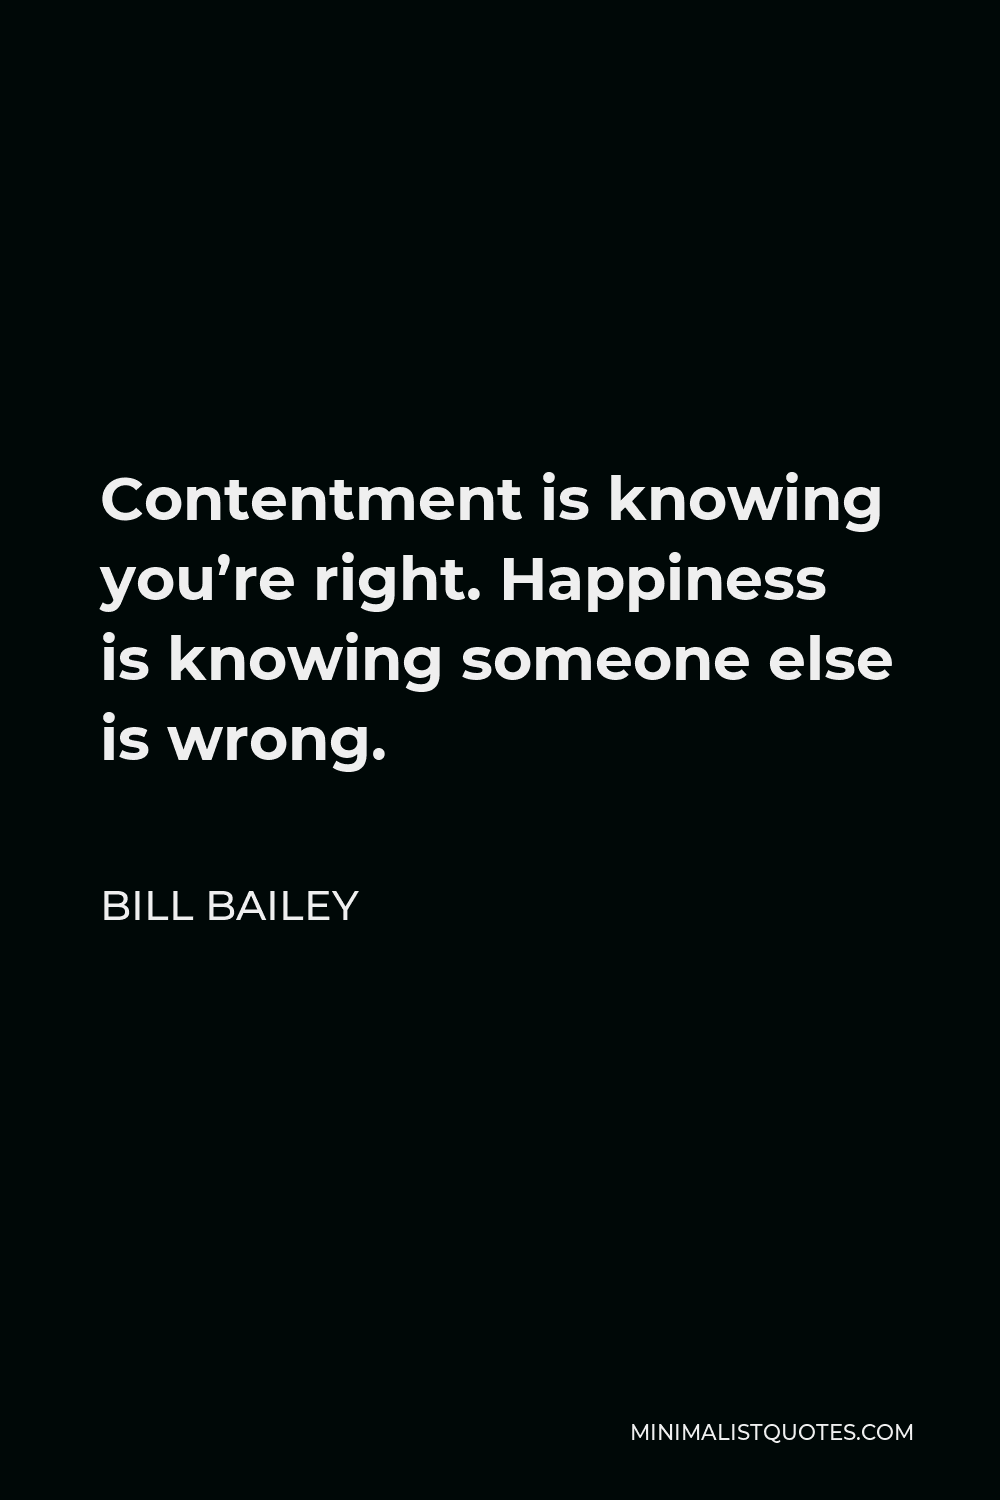 Bill Bailey Quote - Contentment is knowing you’re right. Happiness is knowing someone else is wrong.